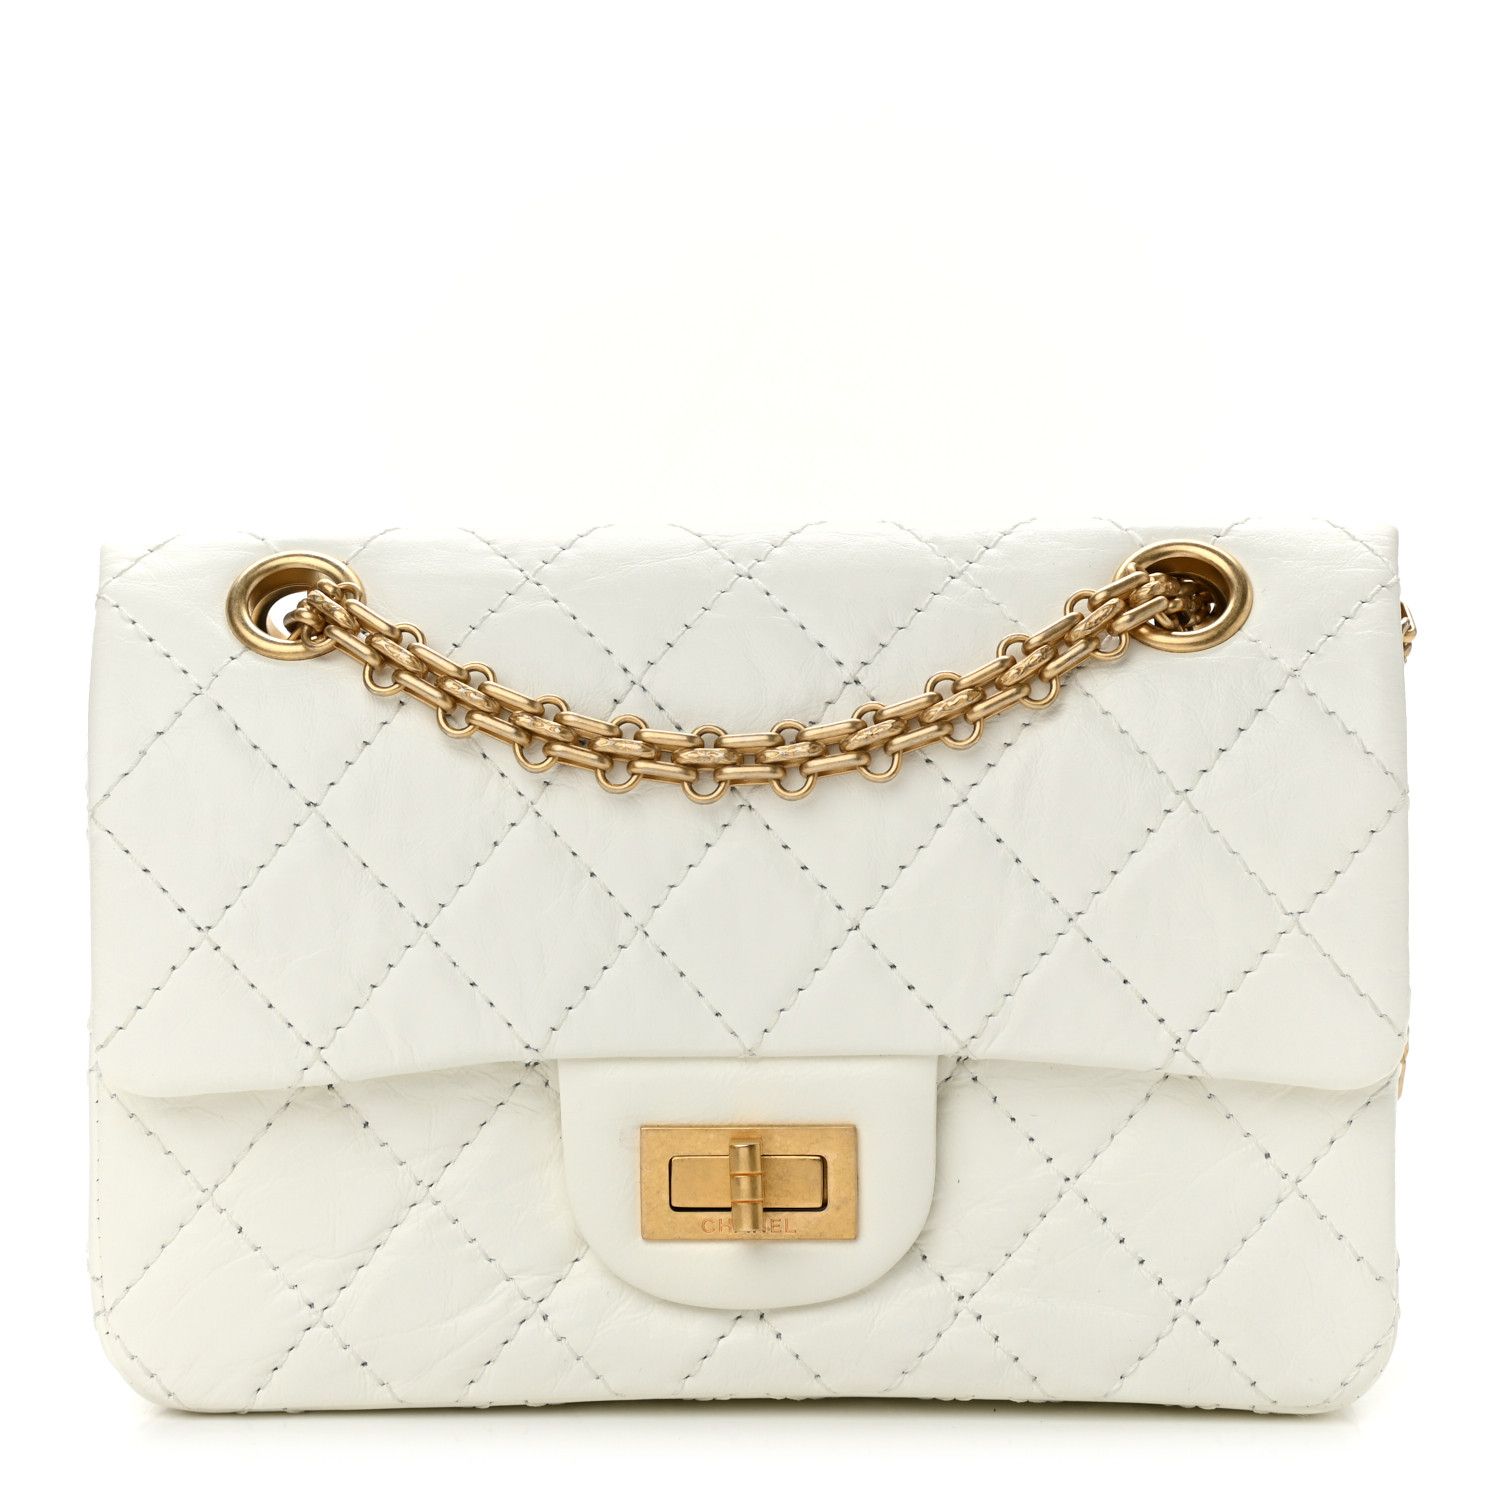 CHANEL Aged Calfskin Quilted 2.55 Reissue Mini Flap White | FASHIONPHILE | Fashionphile